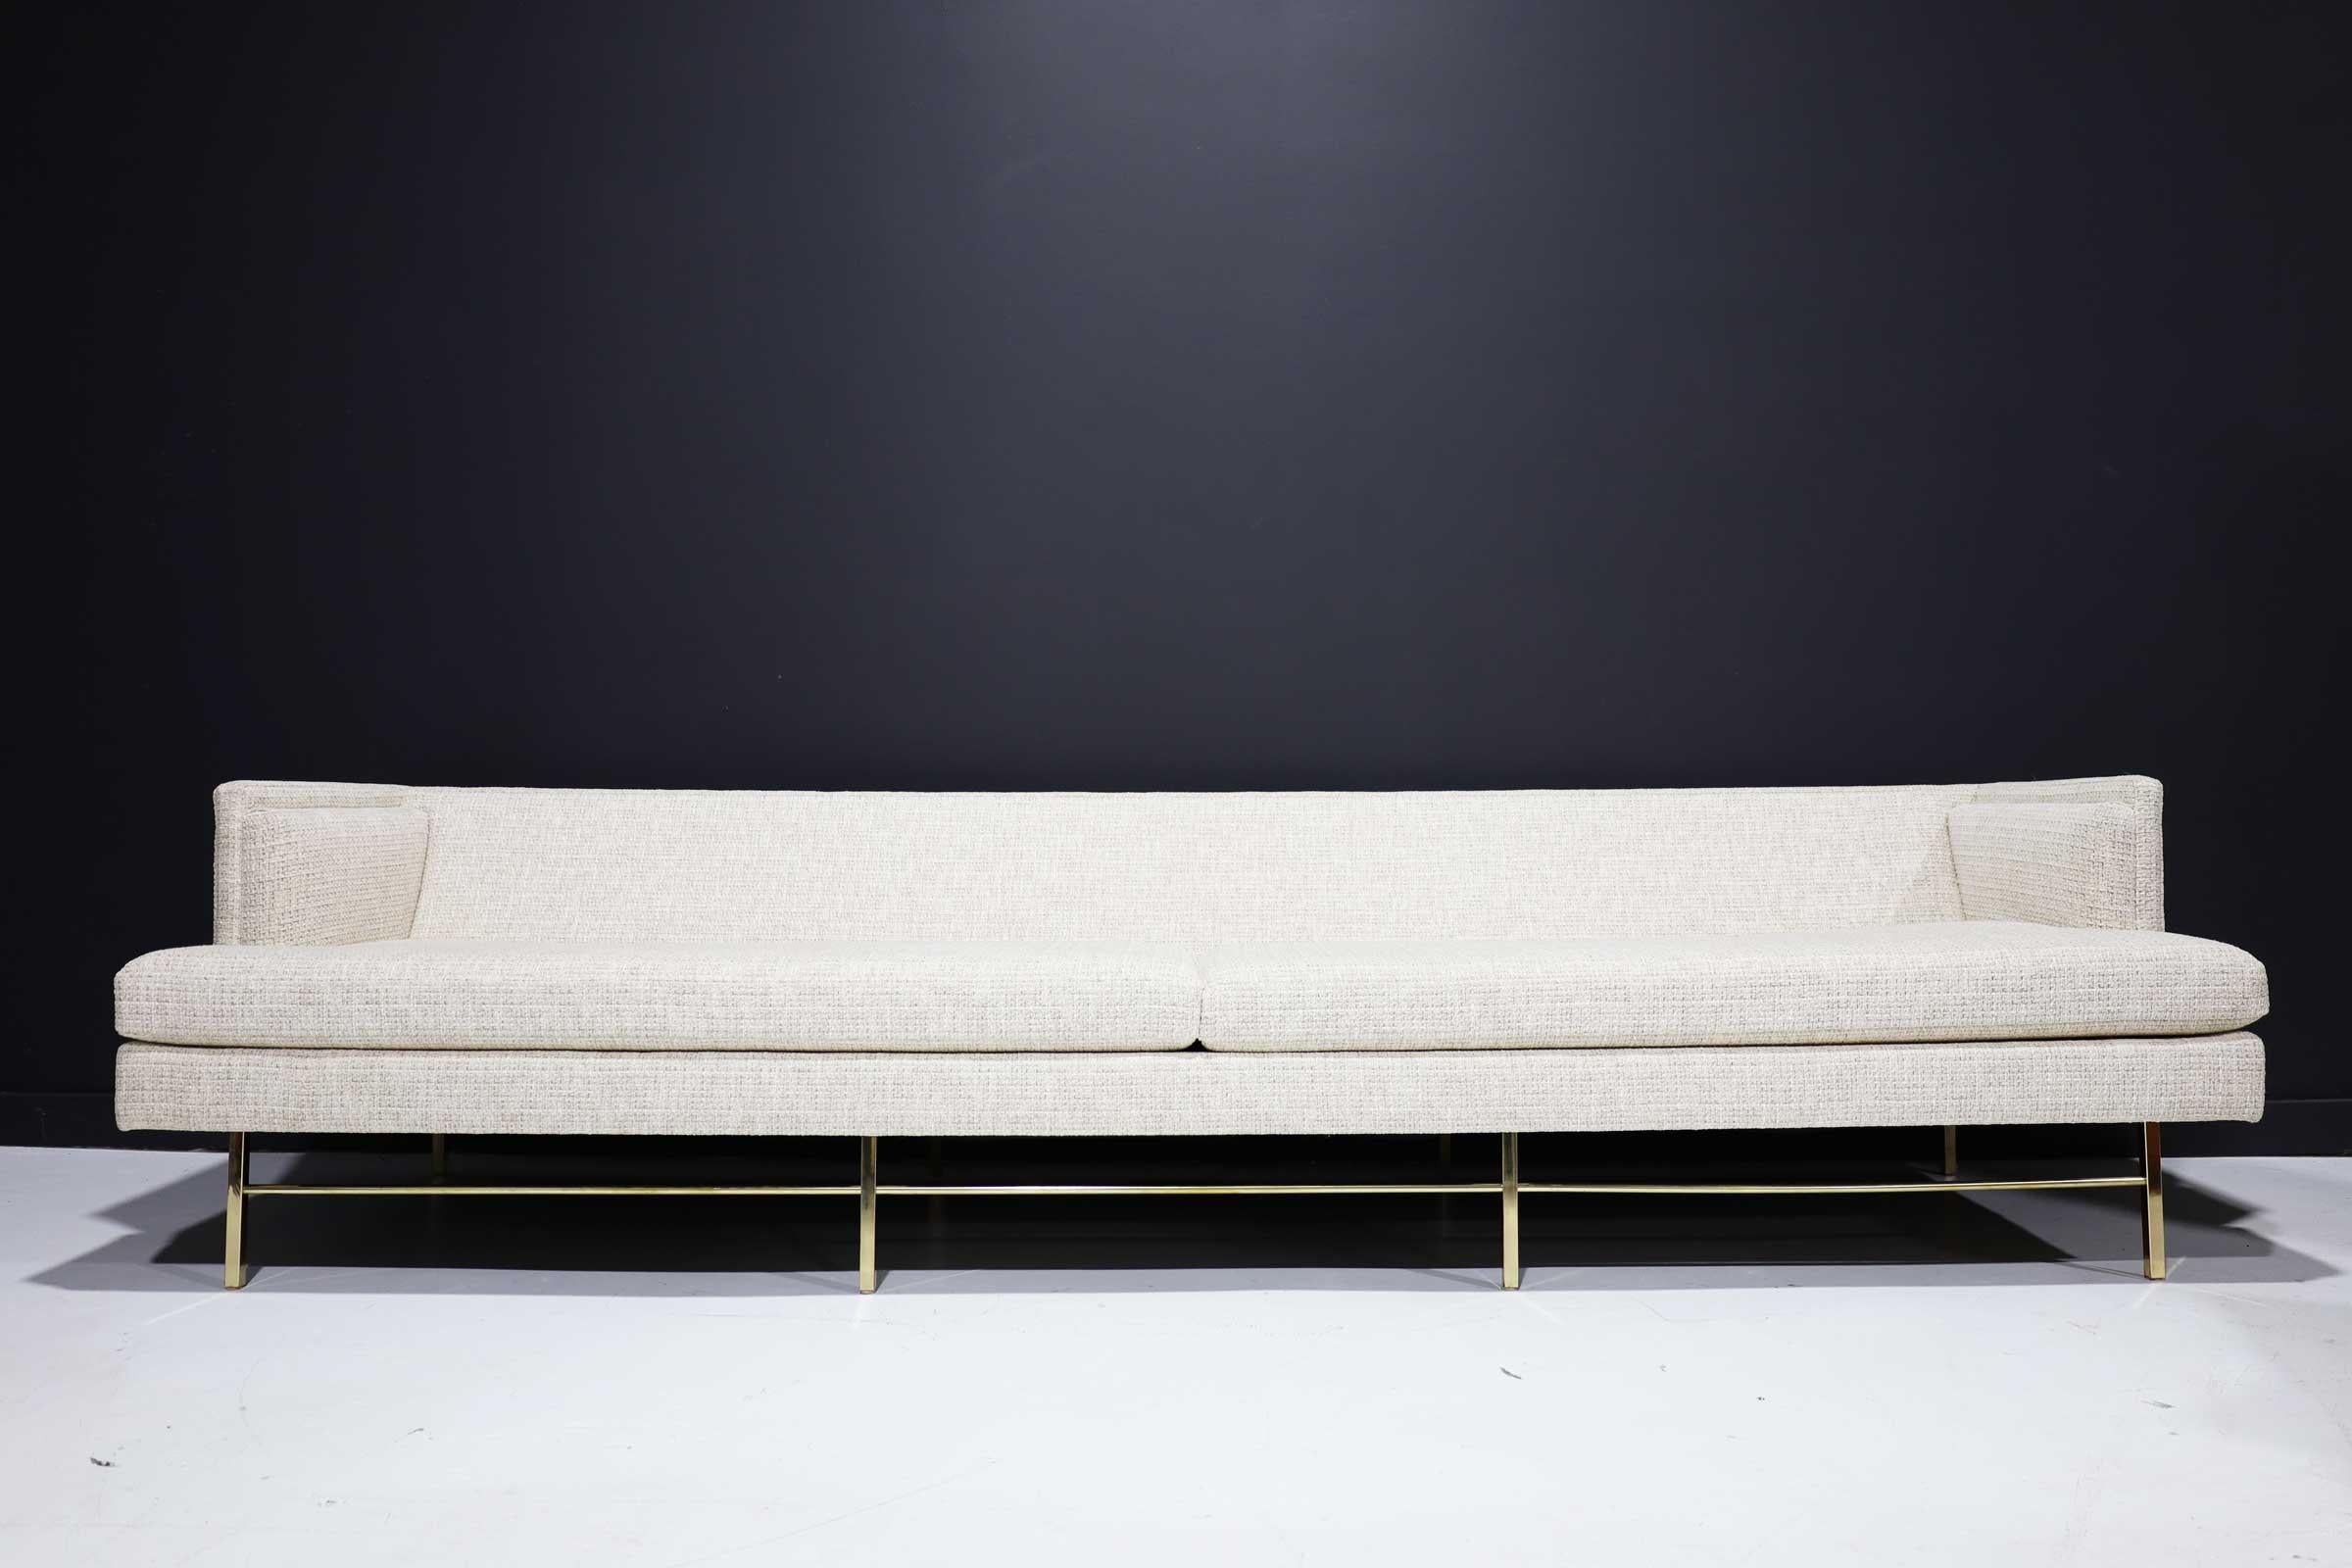 Beautifully restored Paul McCobb sofa in high quality chenille. Legs re-plated and polished and new upholstery in off-white chenille with gold threads.